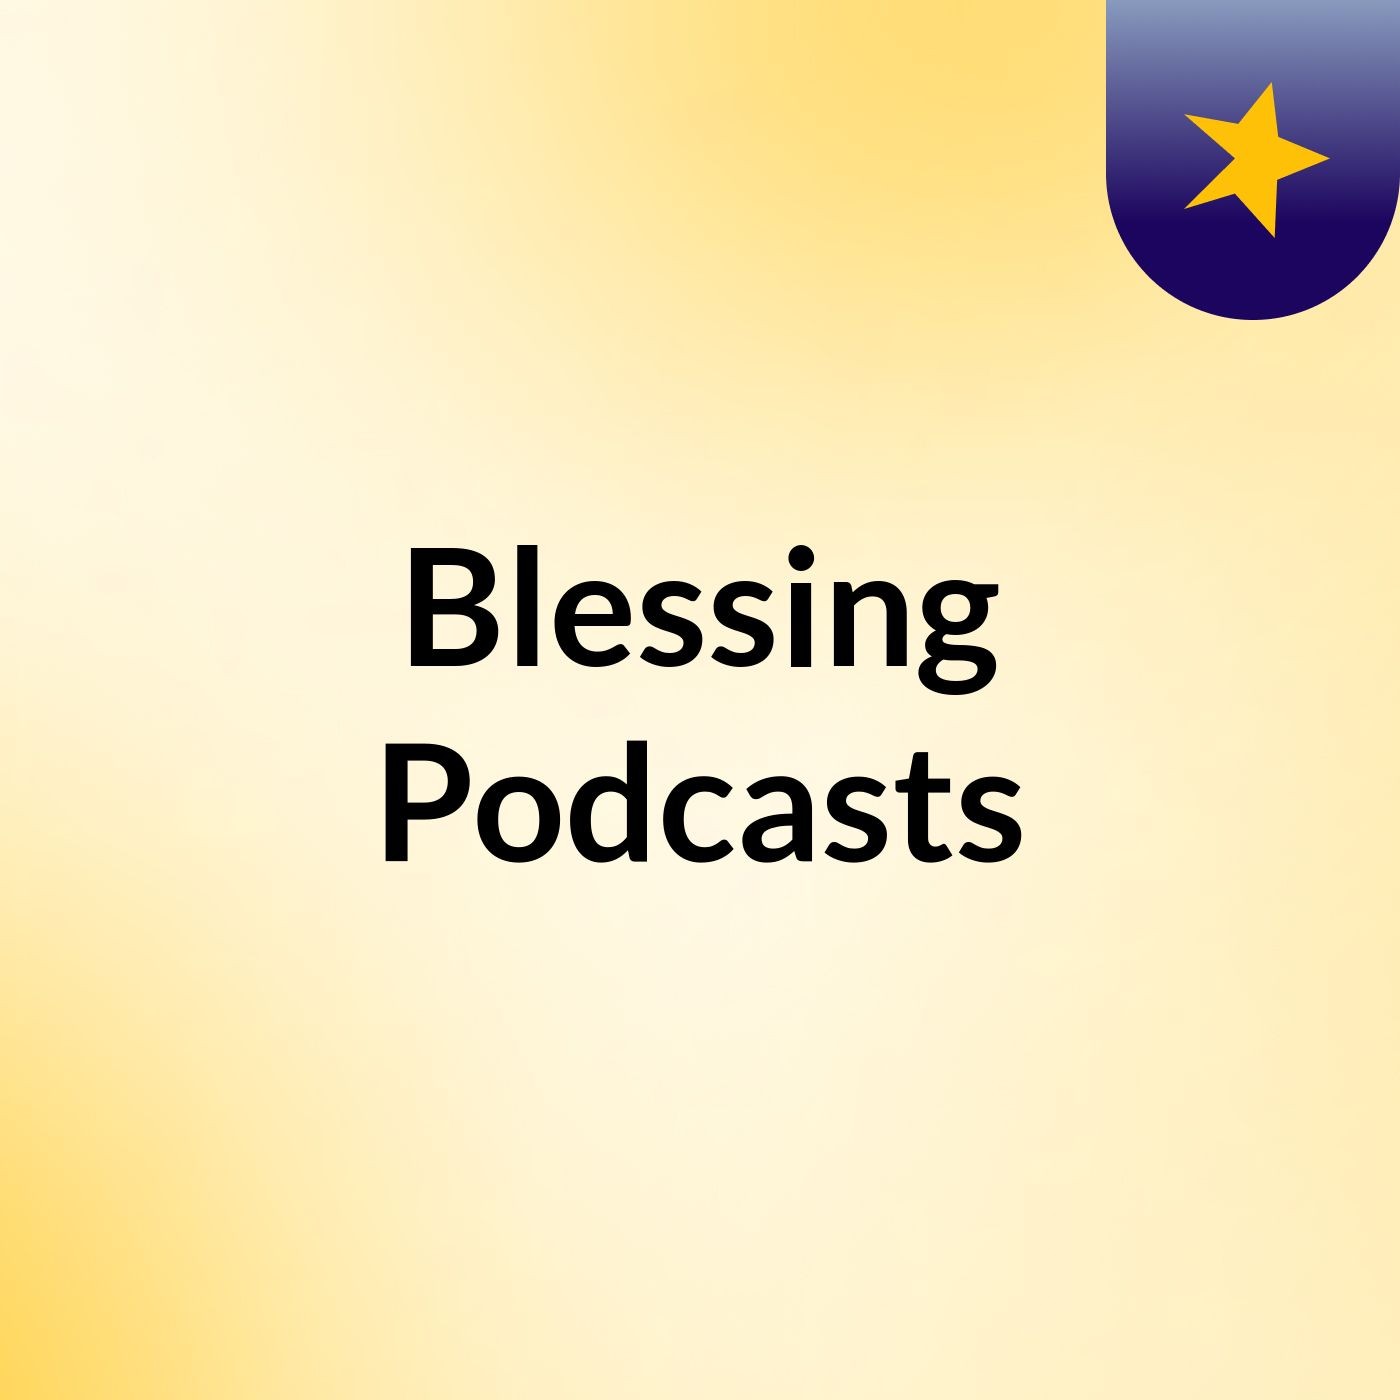 Blessing Podcasts